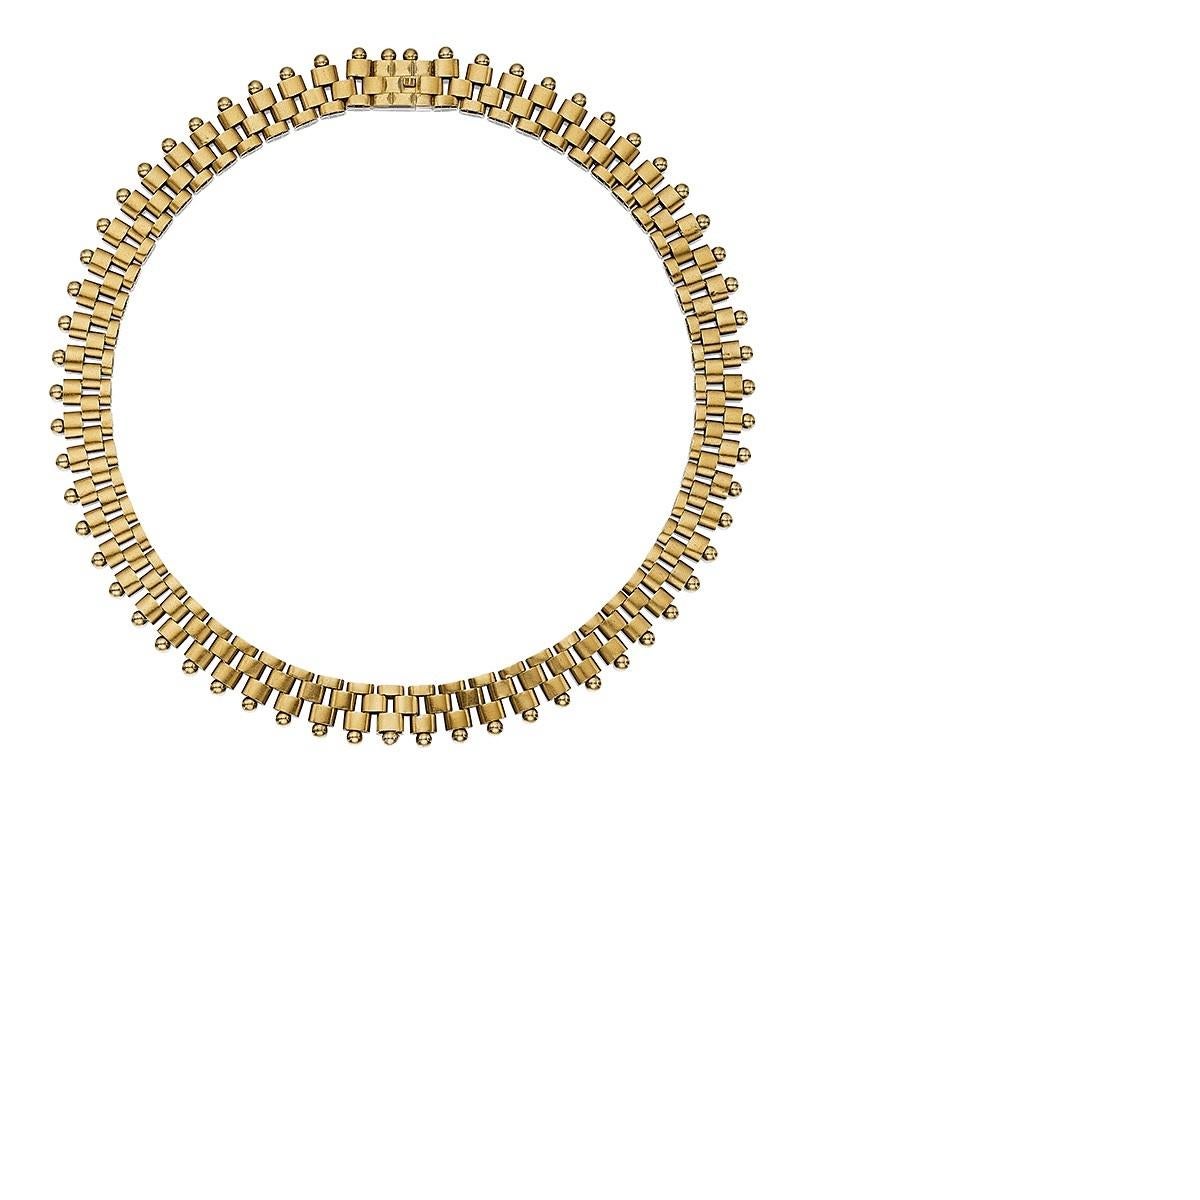 Of Dutch origin, this gold link necklace is composed of three rows of stacked rectangular links with rounded edges and spherical terminals, completed by a brickwork clasp. A retractable bail for hanging a favorite locket or pendant offers extra